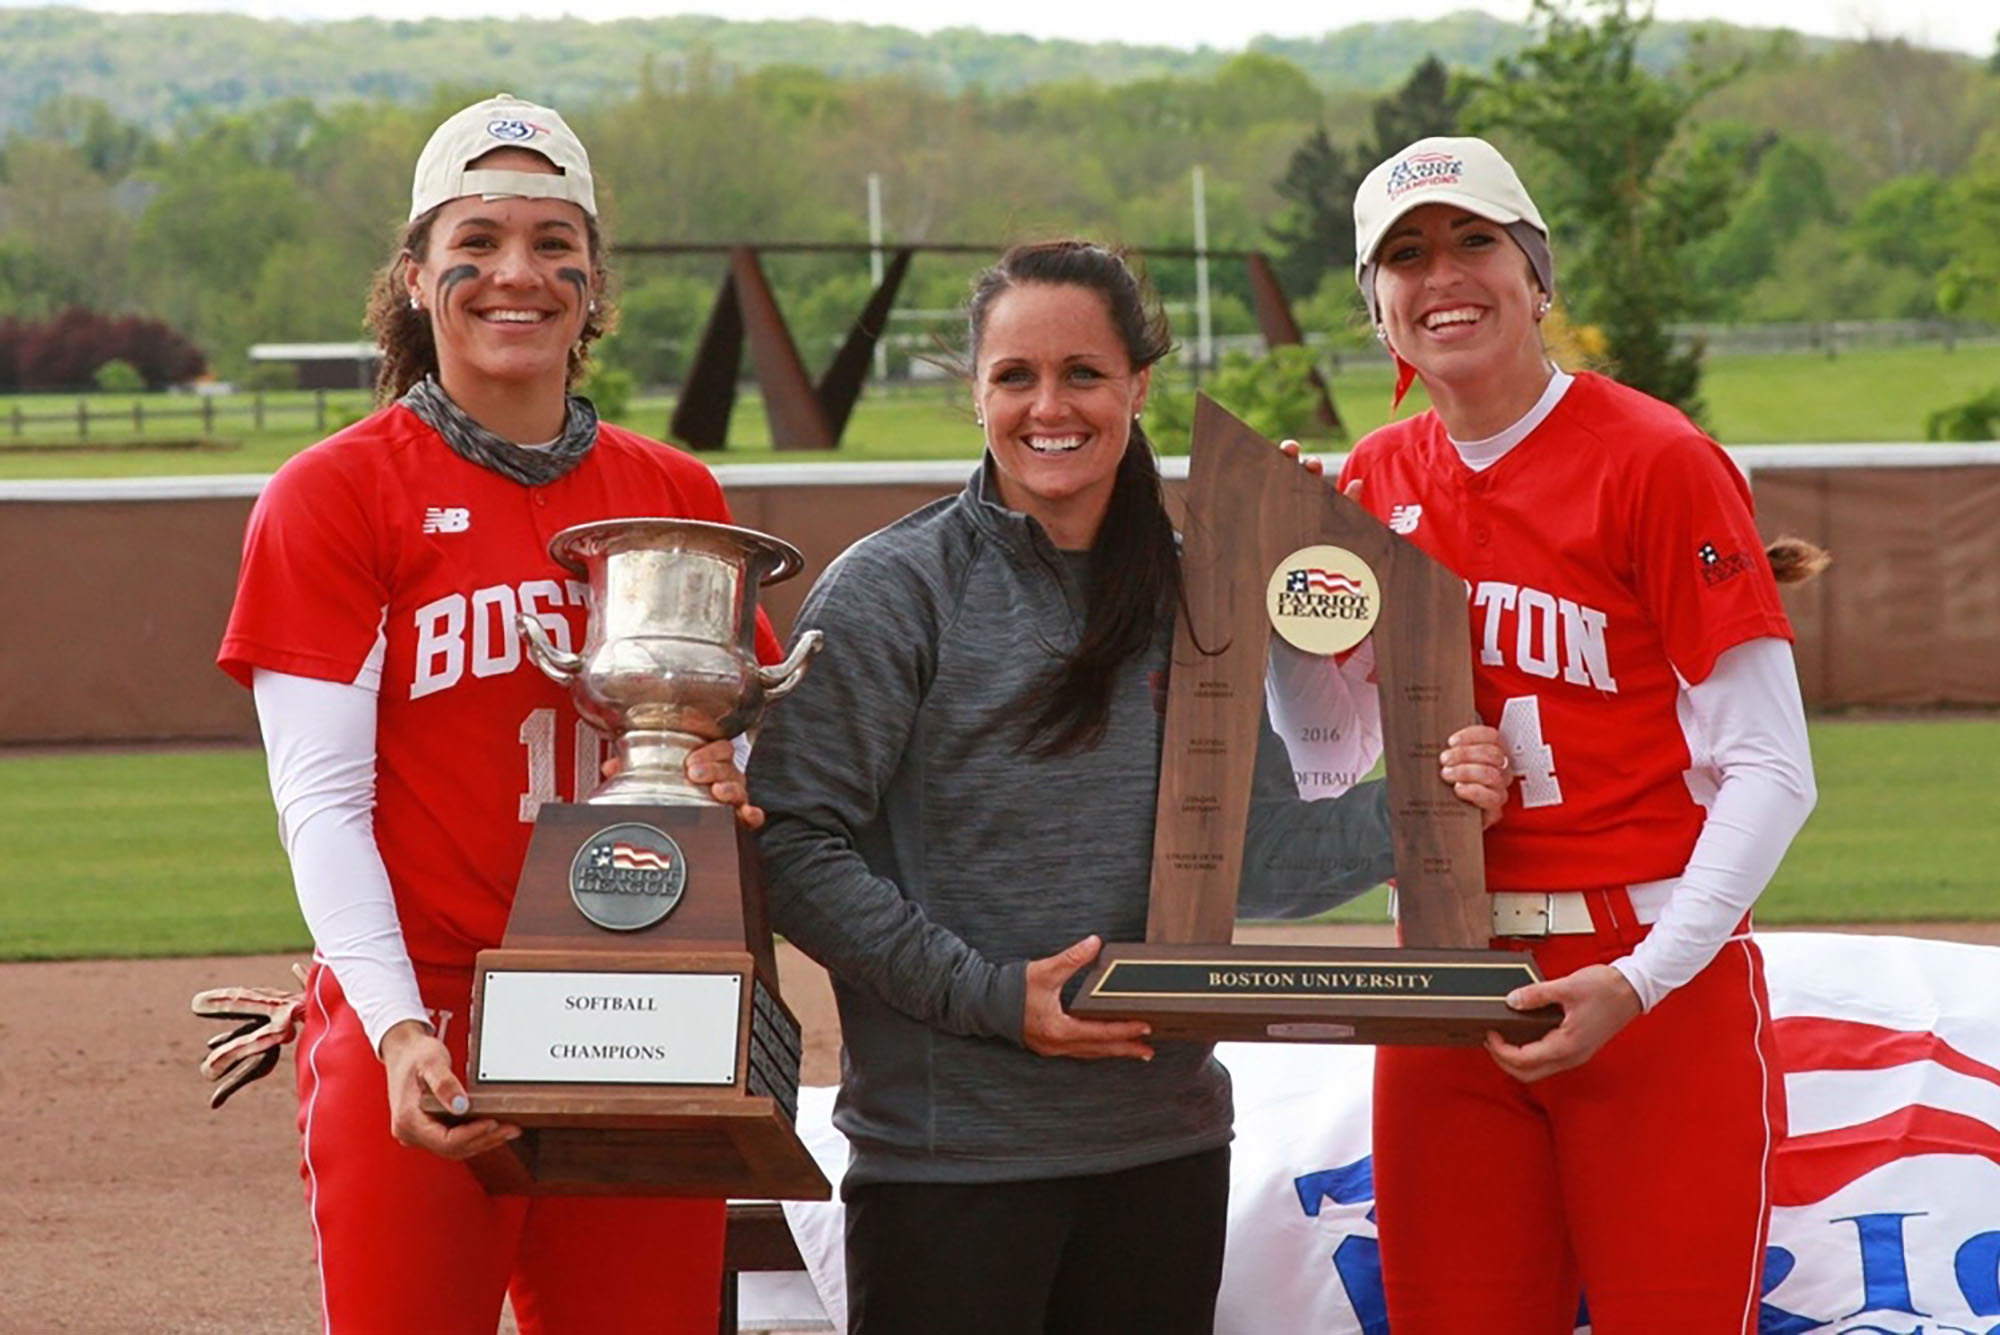 Photo: Ashley Waters, middle, with her two players holding two large trophies. They are all smiling at the camera.